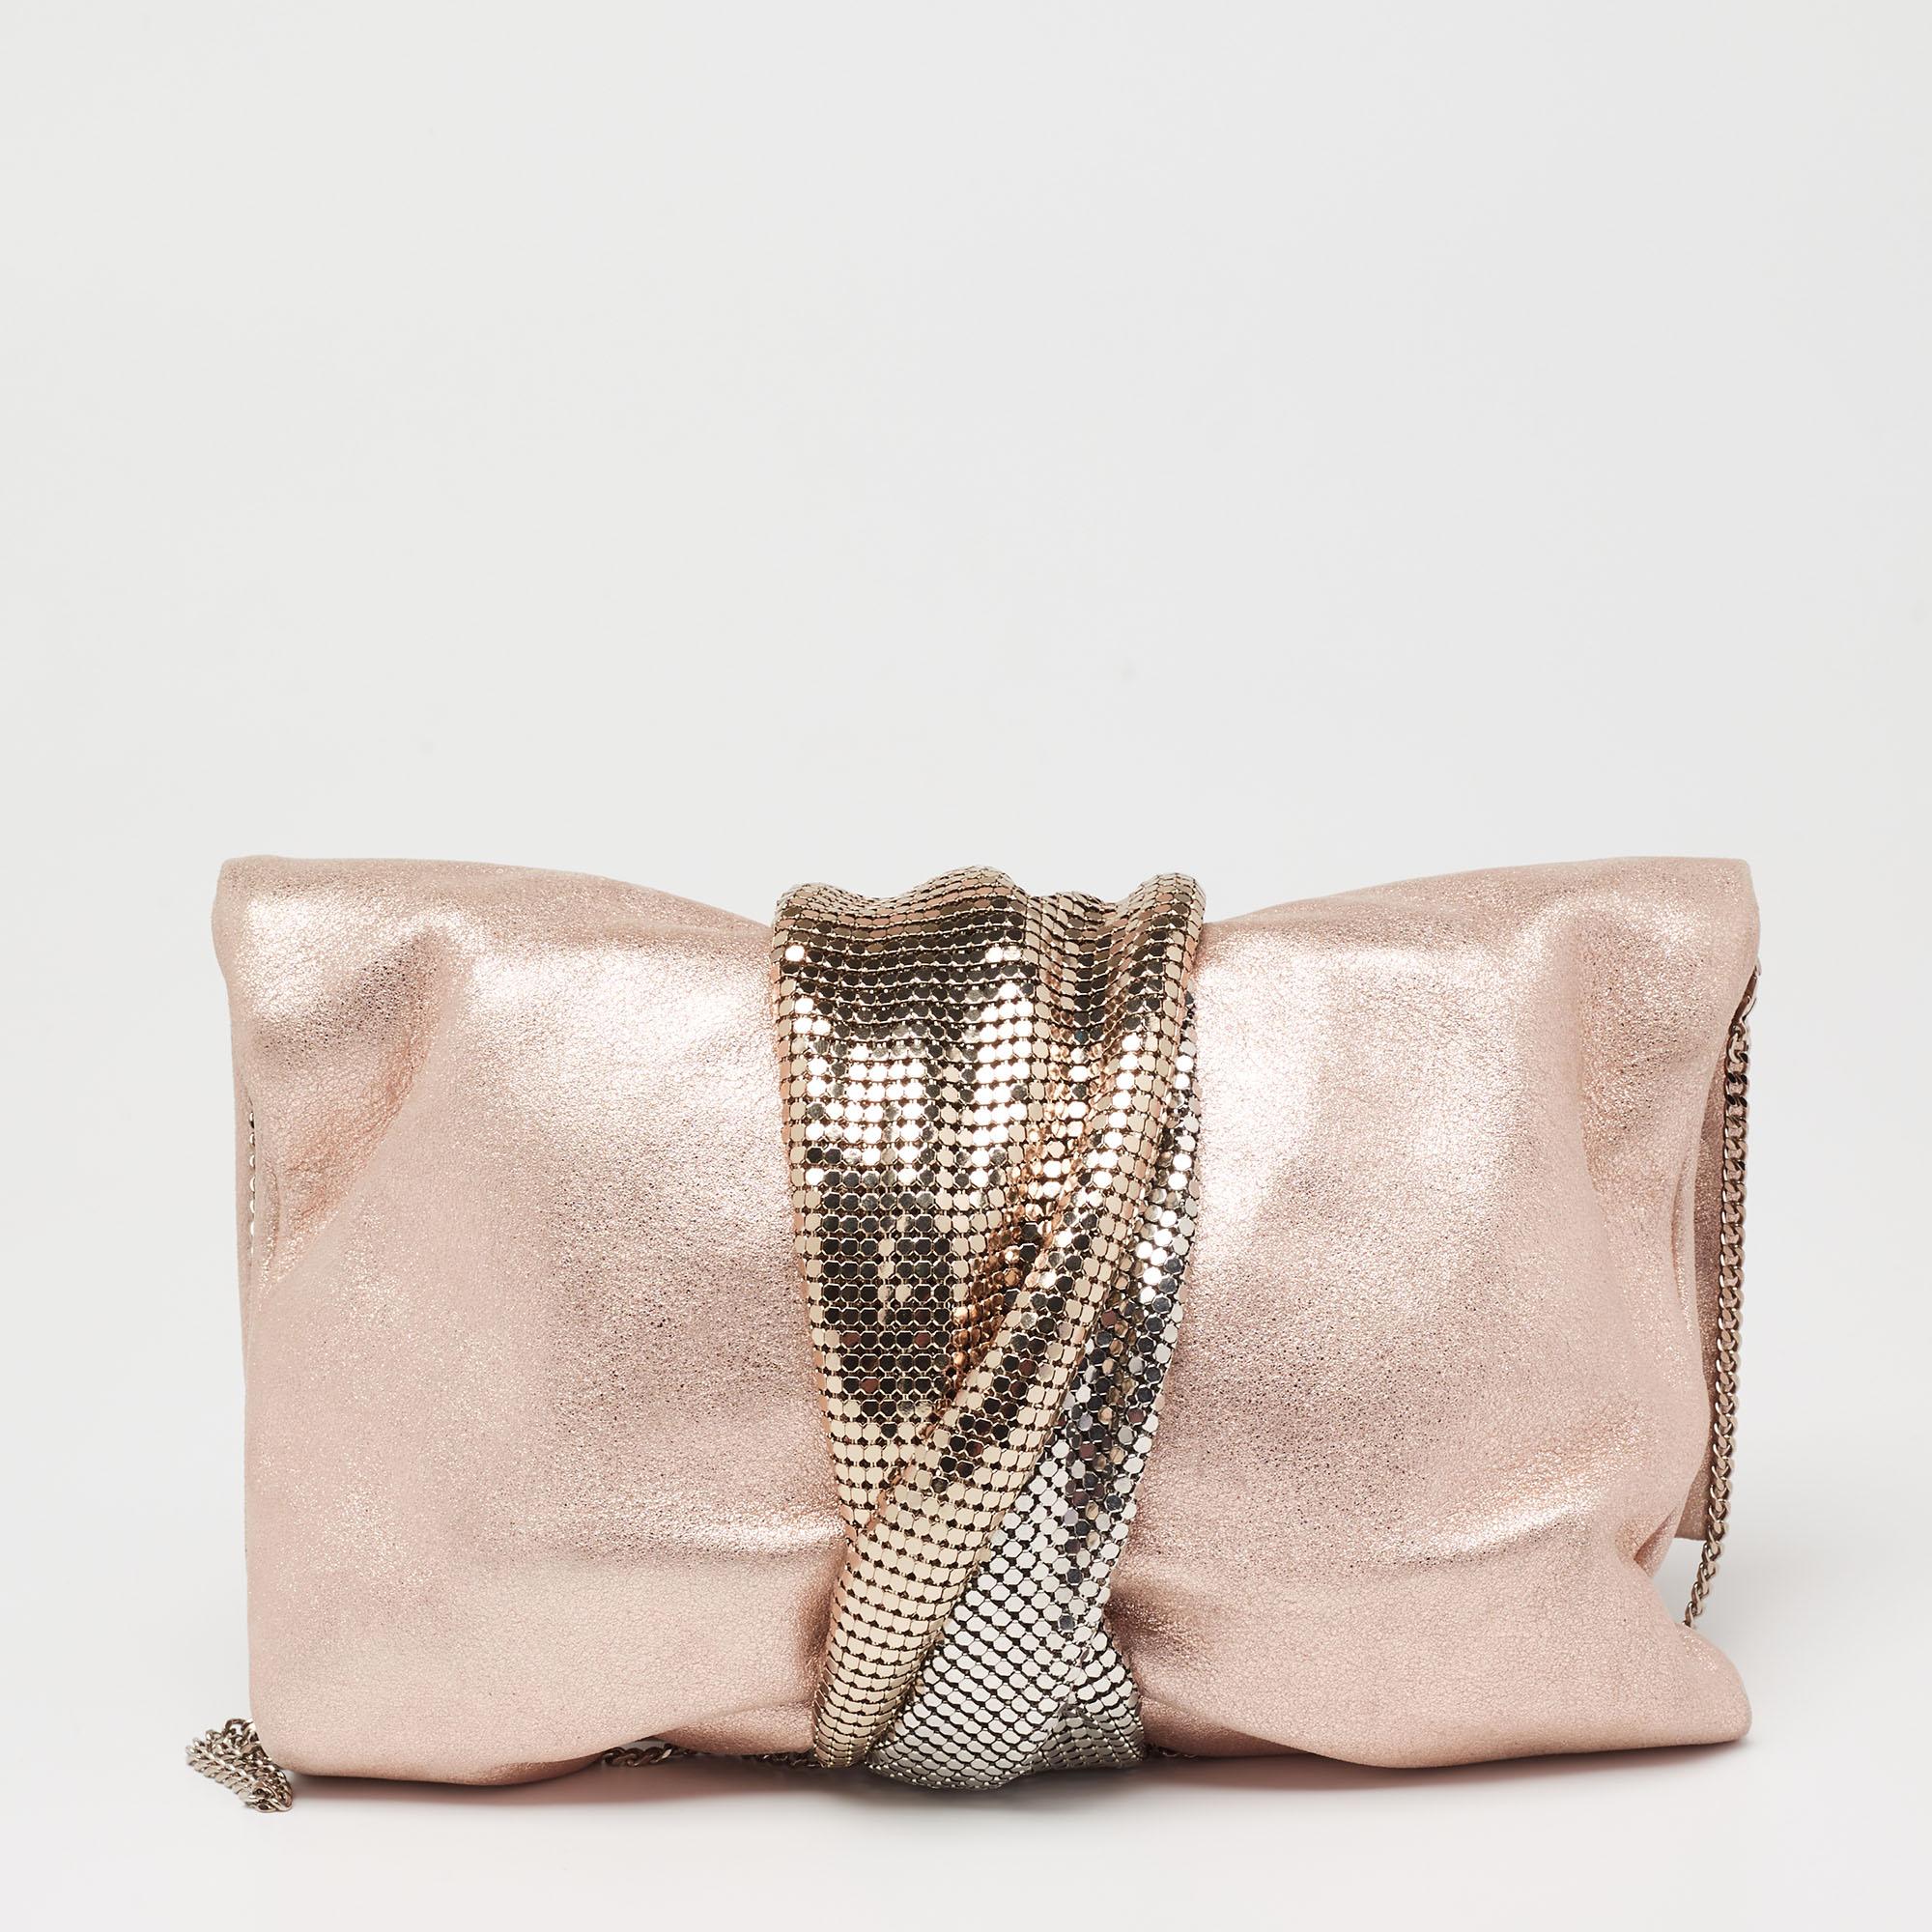 Sprinkle grace and style in every swing with this Chandra clutch from Jimmy Choo. Crafted from metallic suede, the piece is styled with silver-tone chain detail that is wound around the clutch, ending as the clasp. The insides are lined with satin